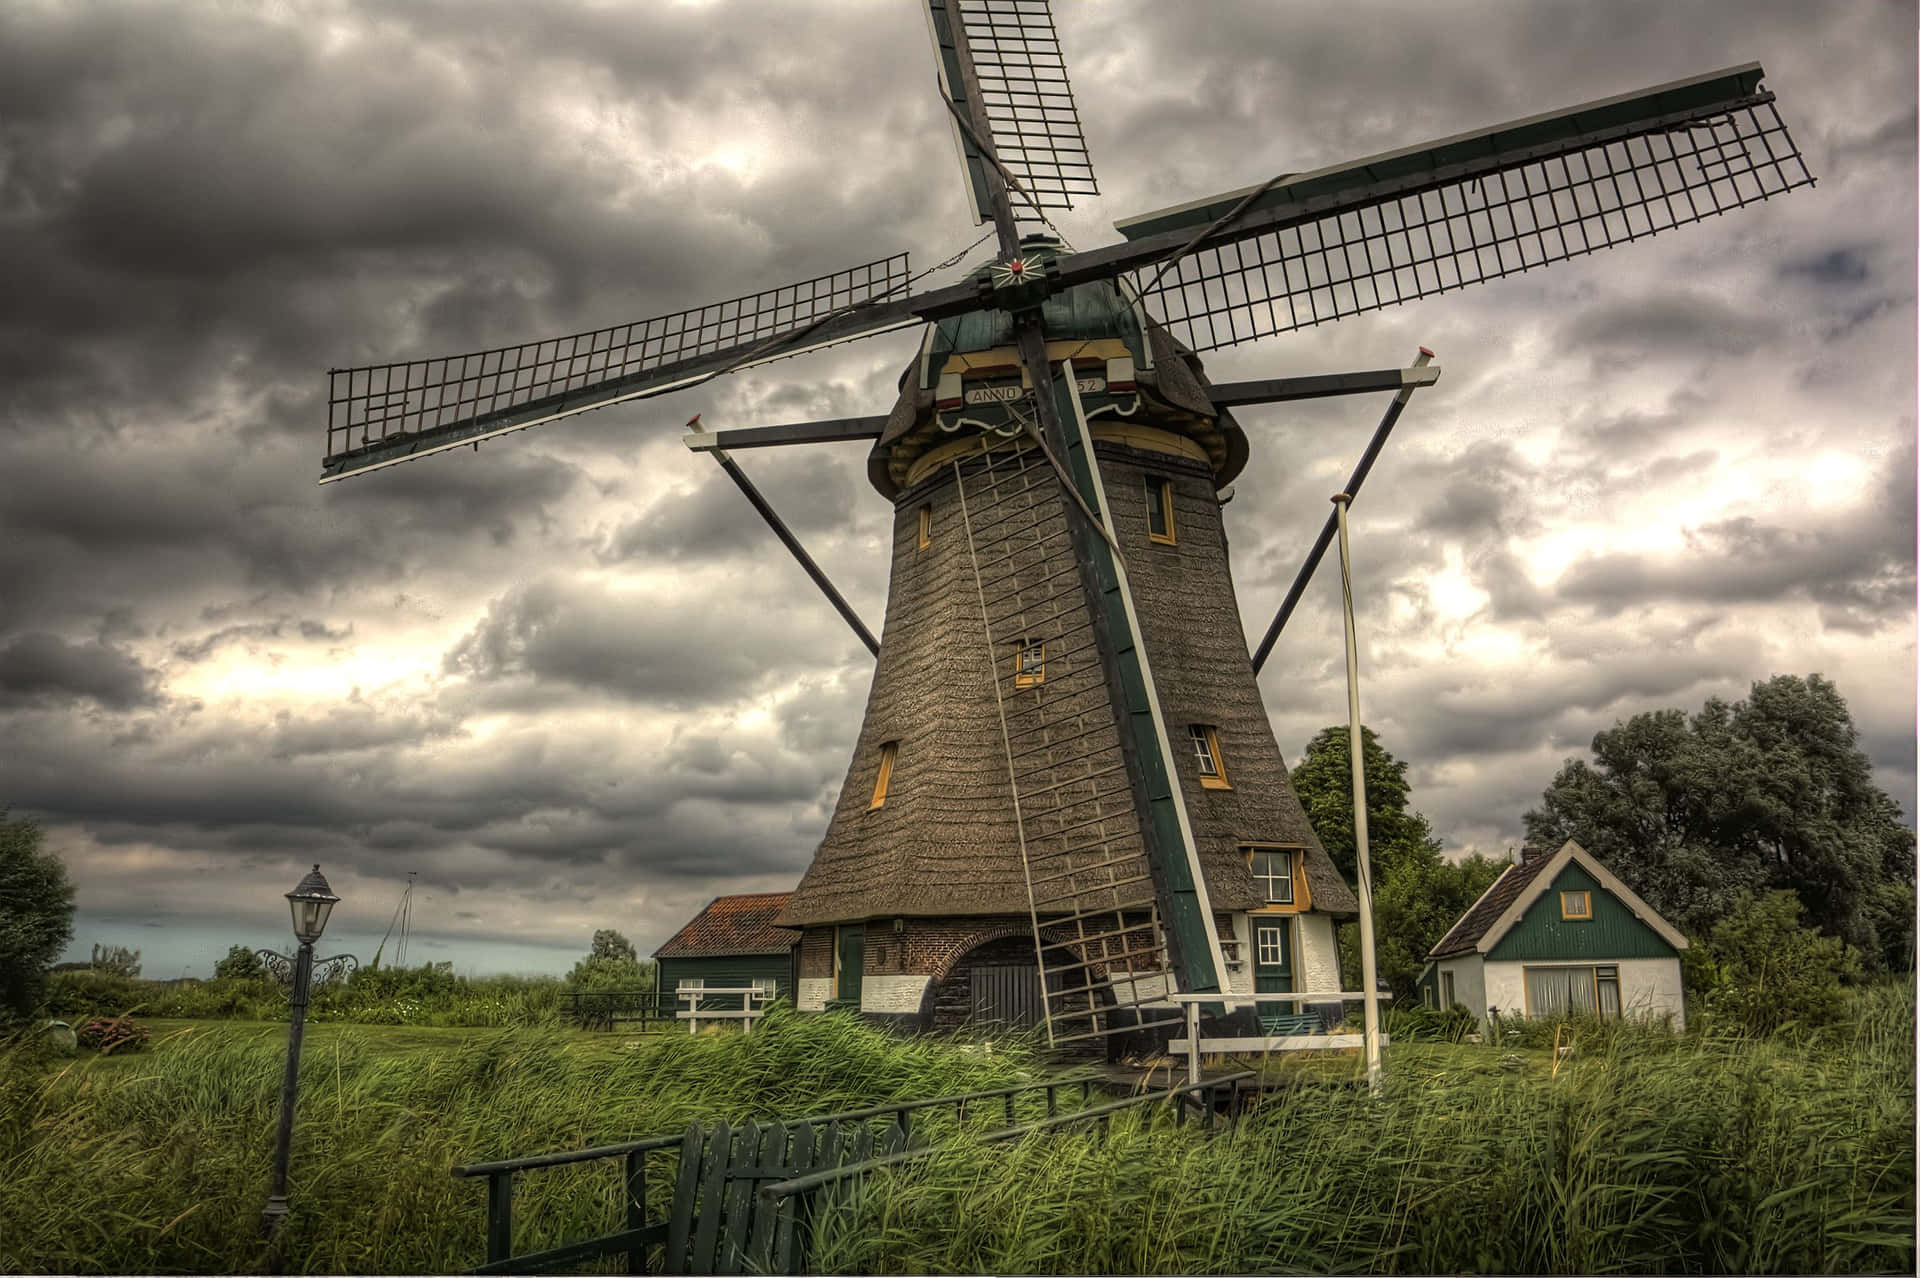 A breathtaking view of a windmill in the Netherlands countryside